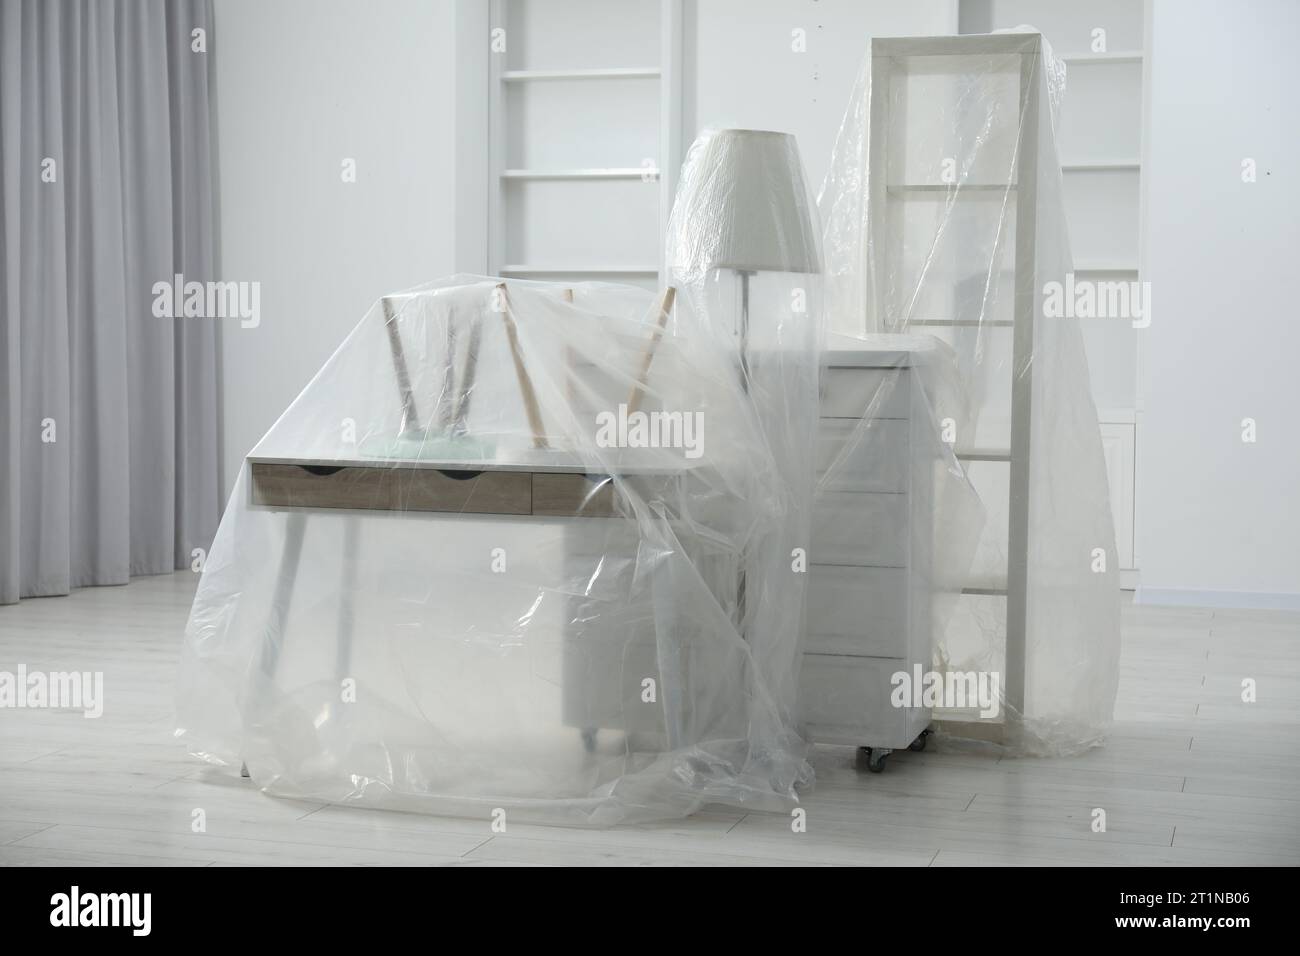 Modern furniture covered with plastic film at home Stock Photo